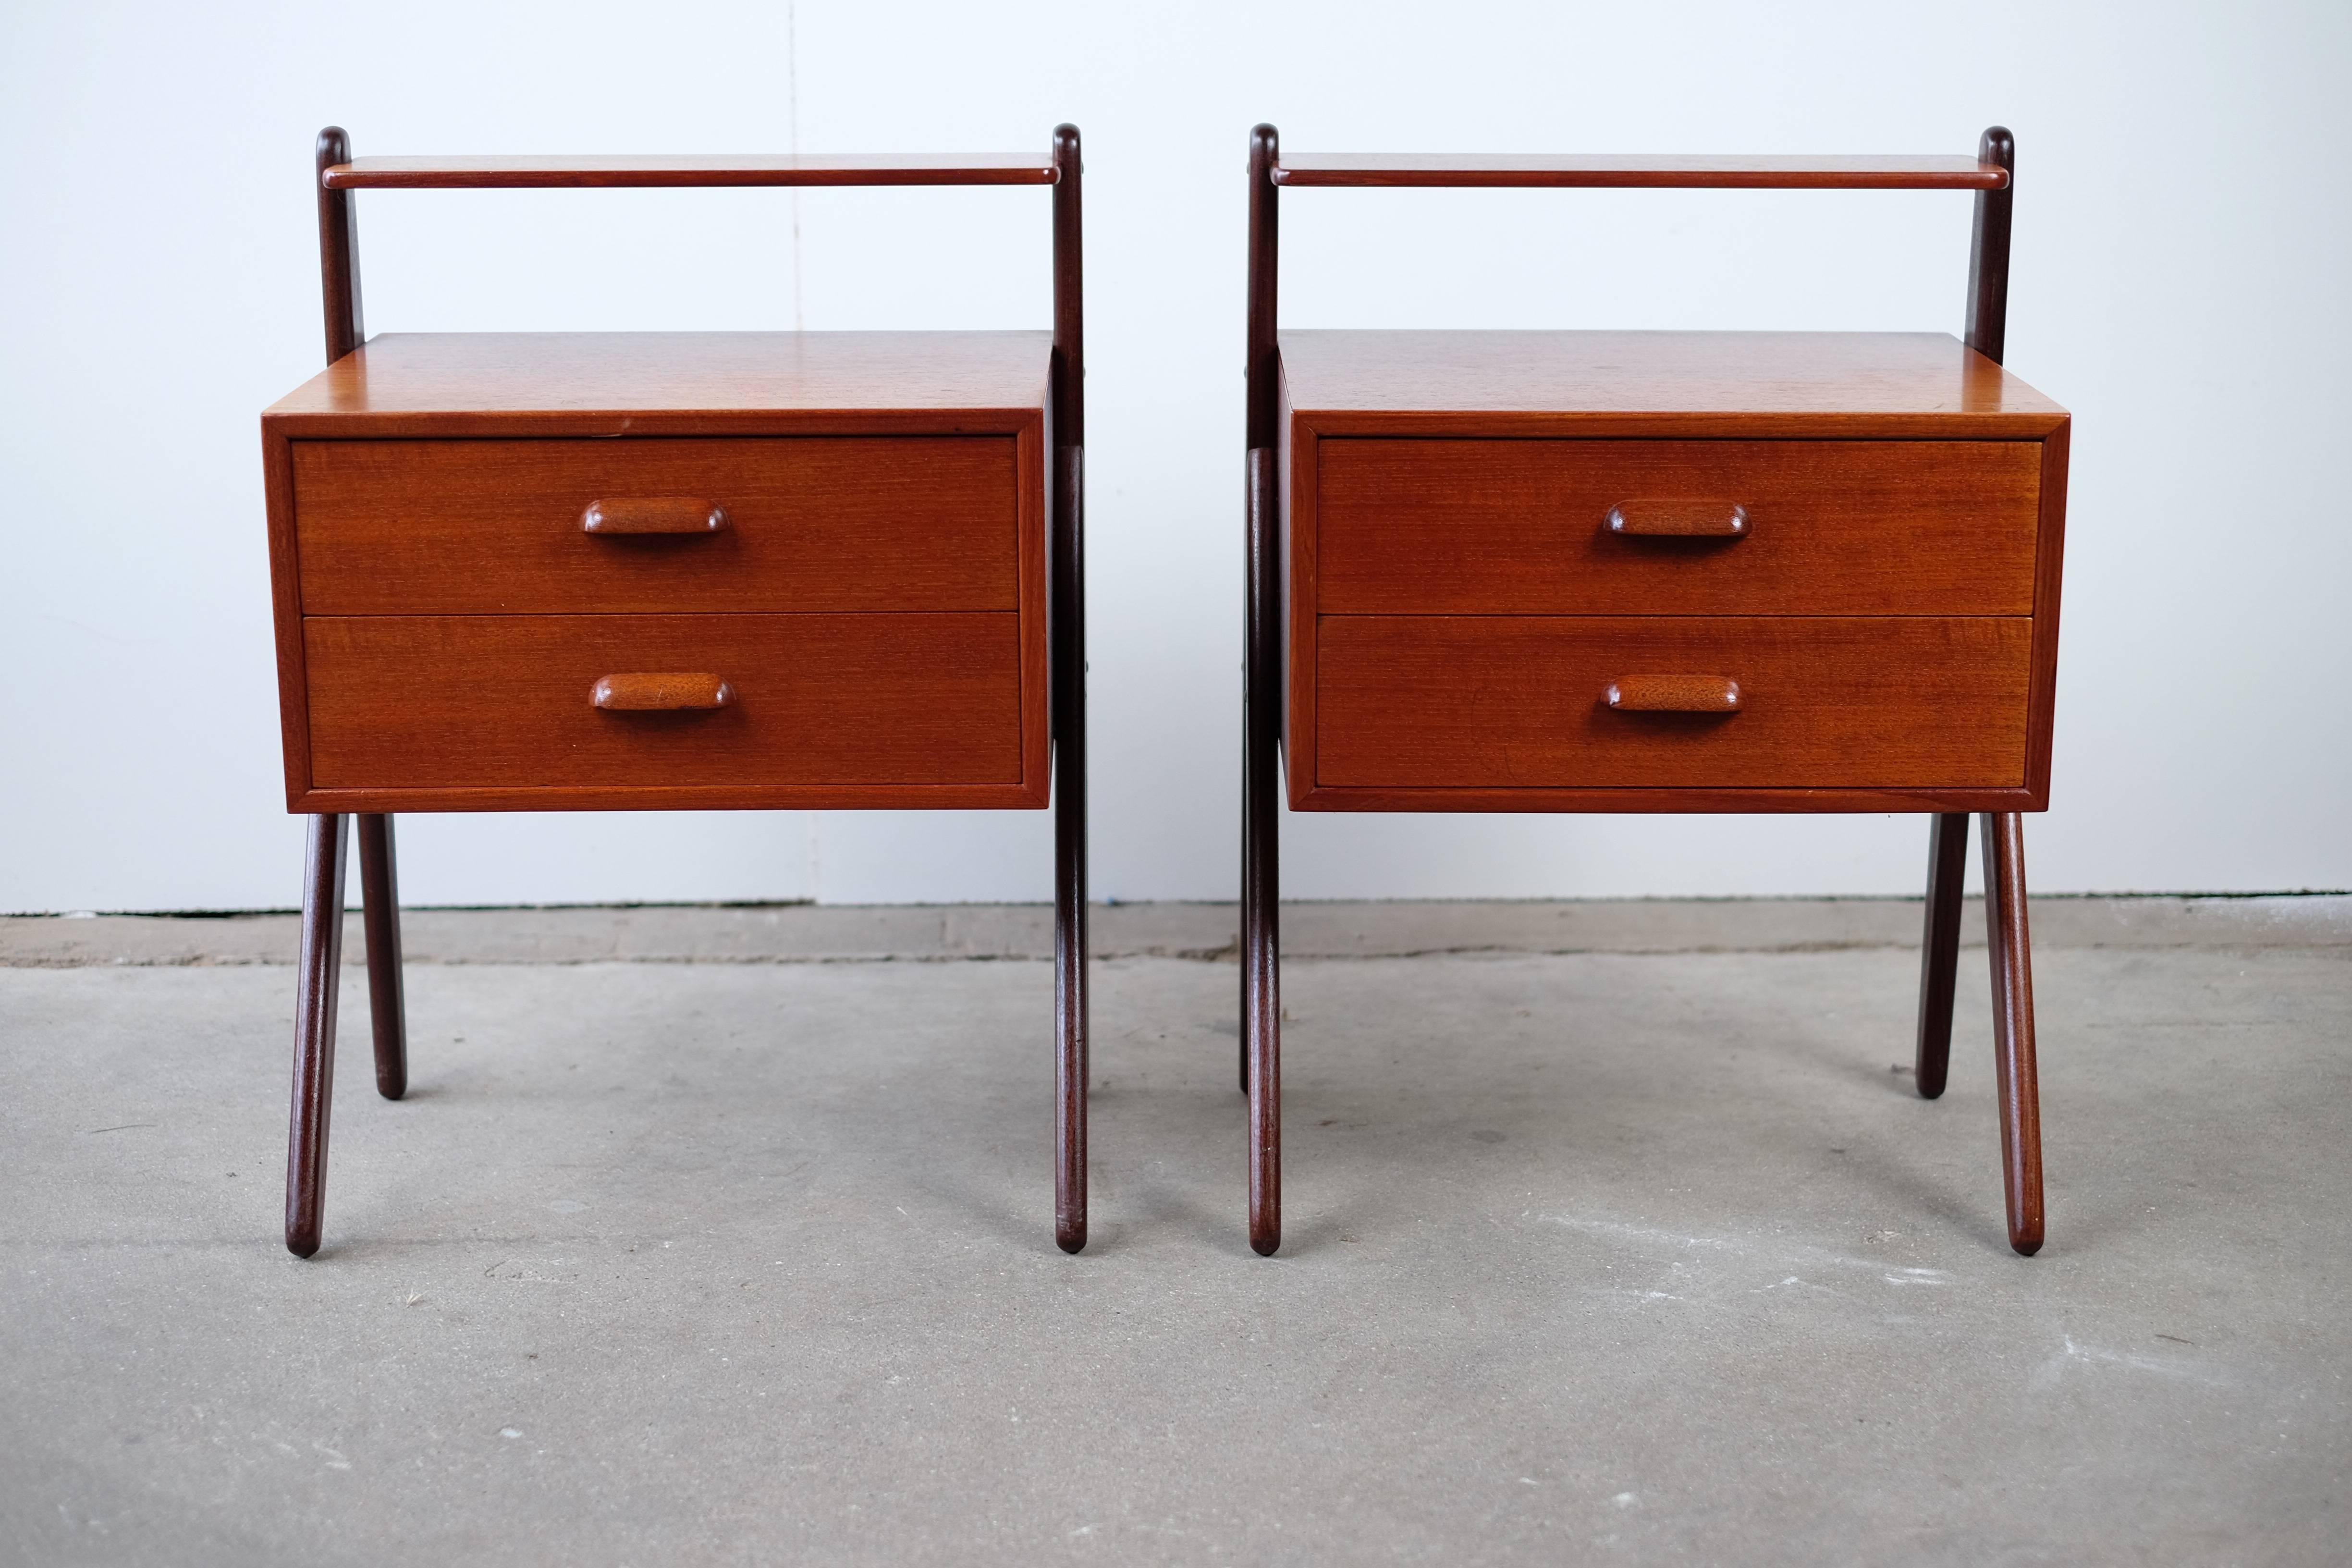 A beautiful pair of nightstands, in the front two drawers and a over shelf - manufactured at Ørum Møbelfabrik. (Stamped)

The nightstands are in vintage condition and one of them has some small holes (Please see pictures, it will be possible for